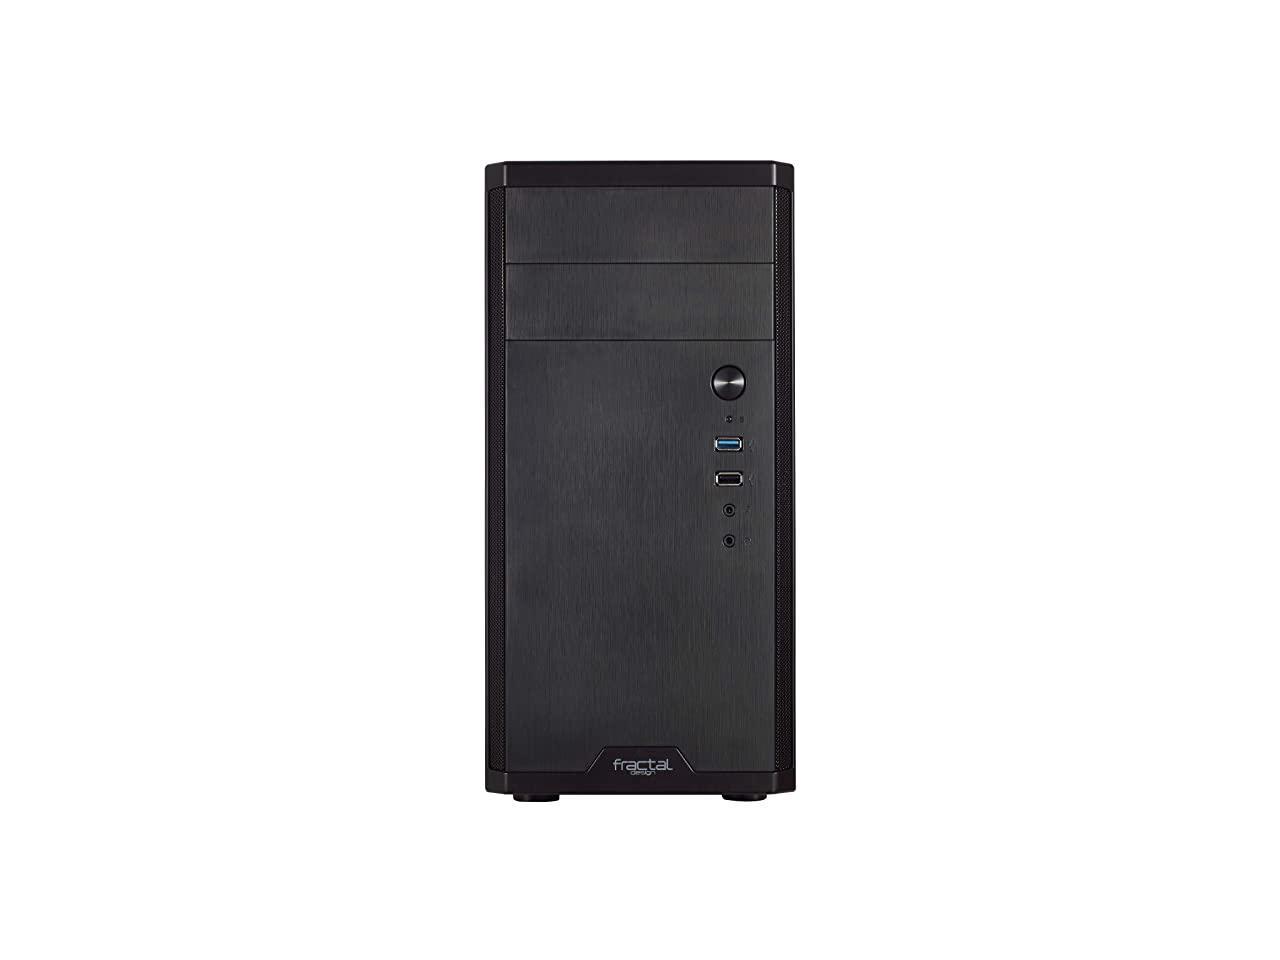 Core 1100 Mini Tower Computer Case mATX High Airflow And Cooling 